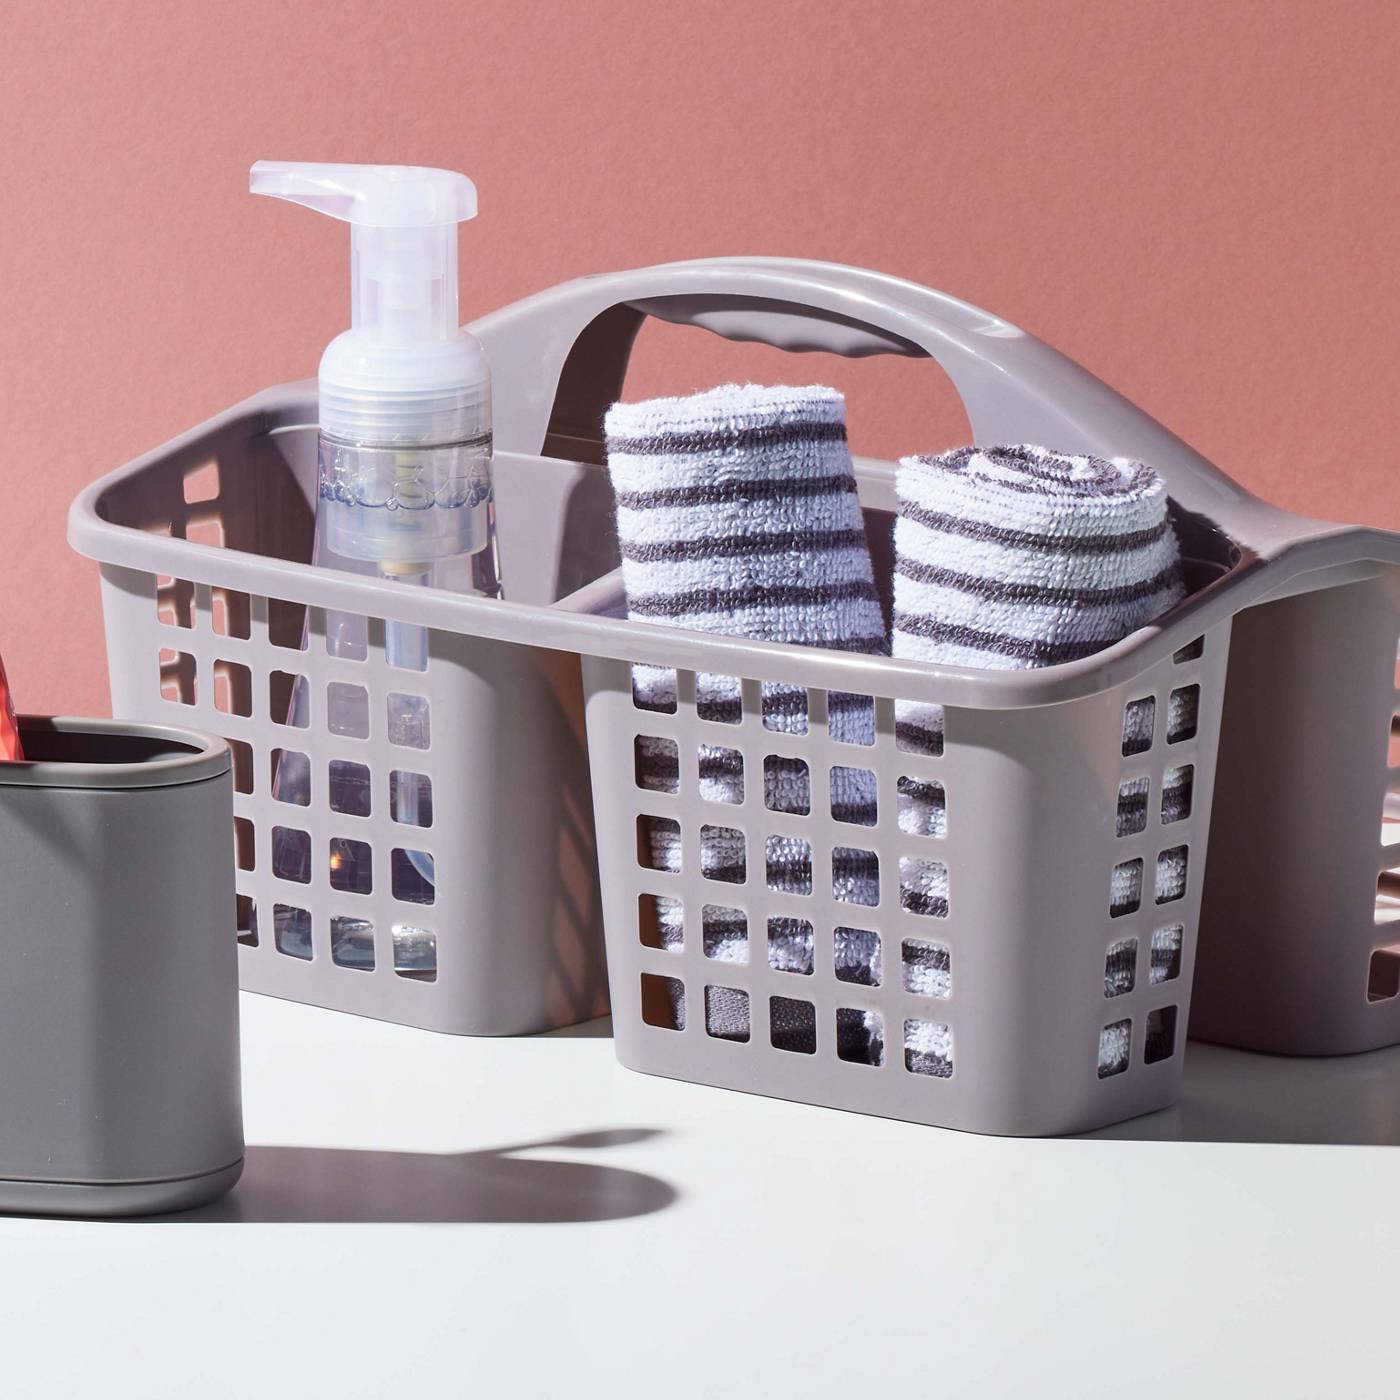 Destination Holiday Shower Caddy - Gray; image 2 of 3